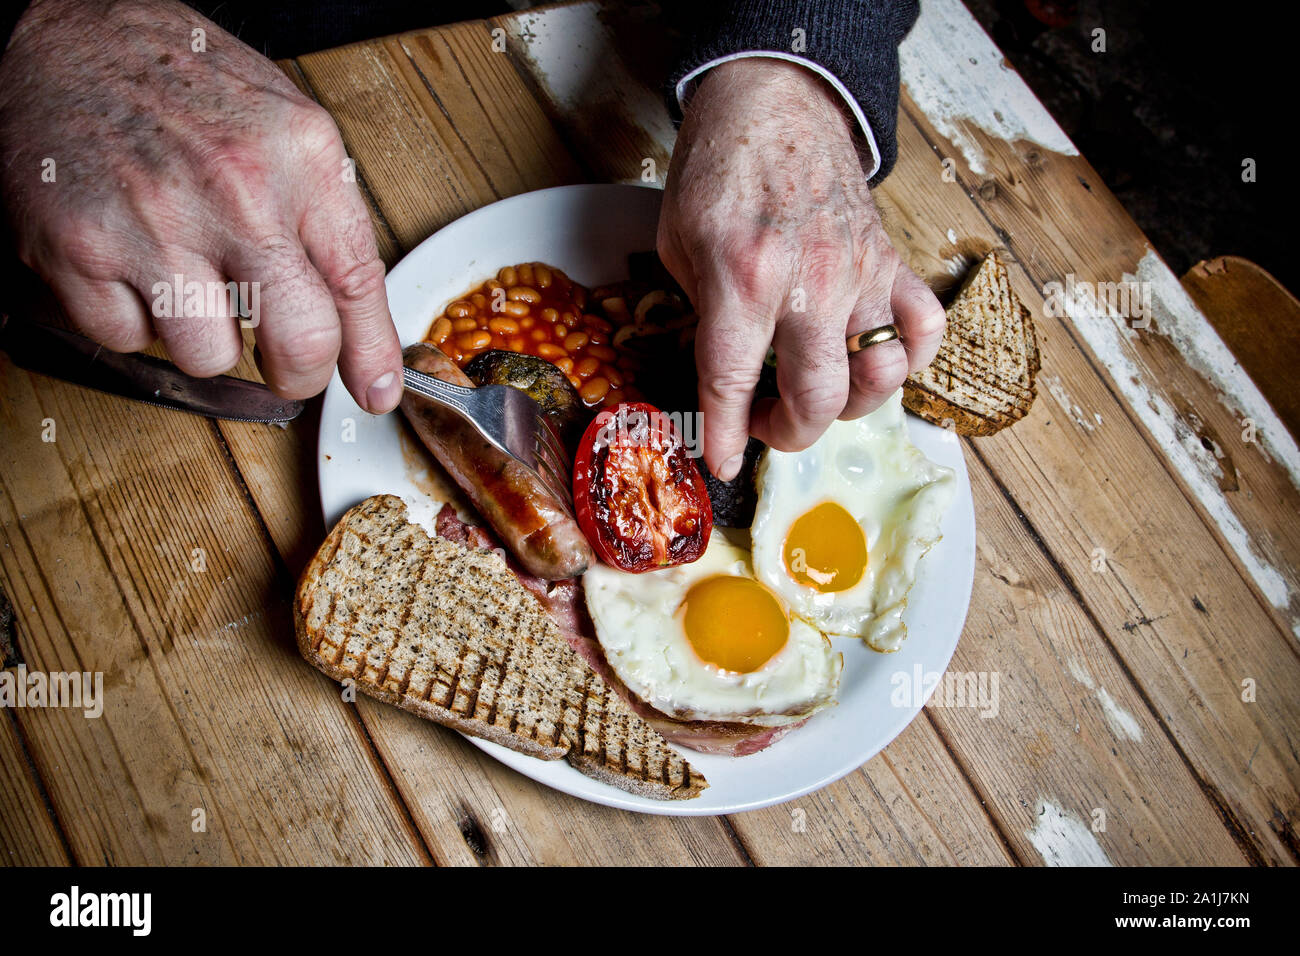 Full English cooked breakfast meal. Stock Photo